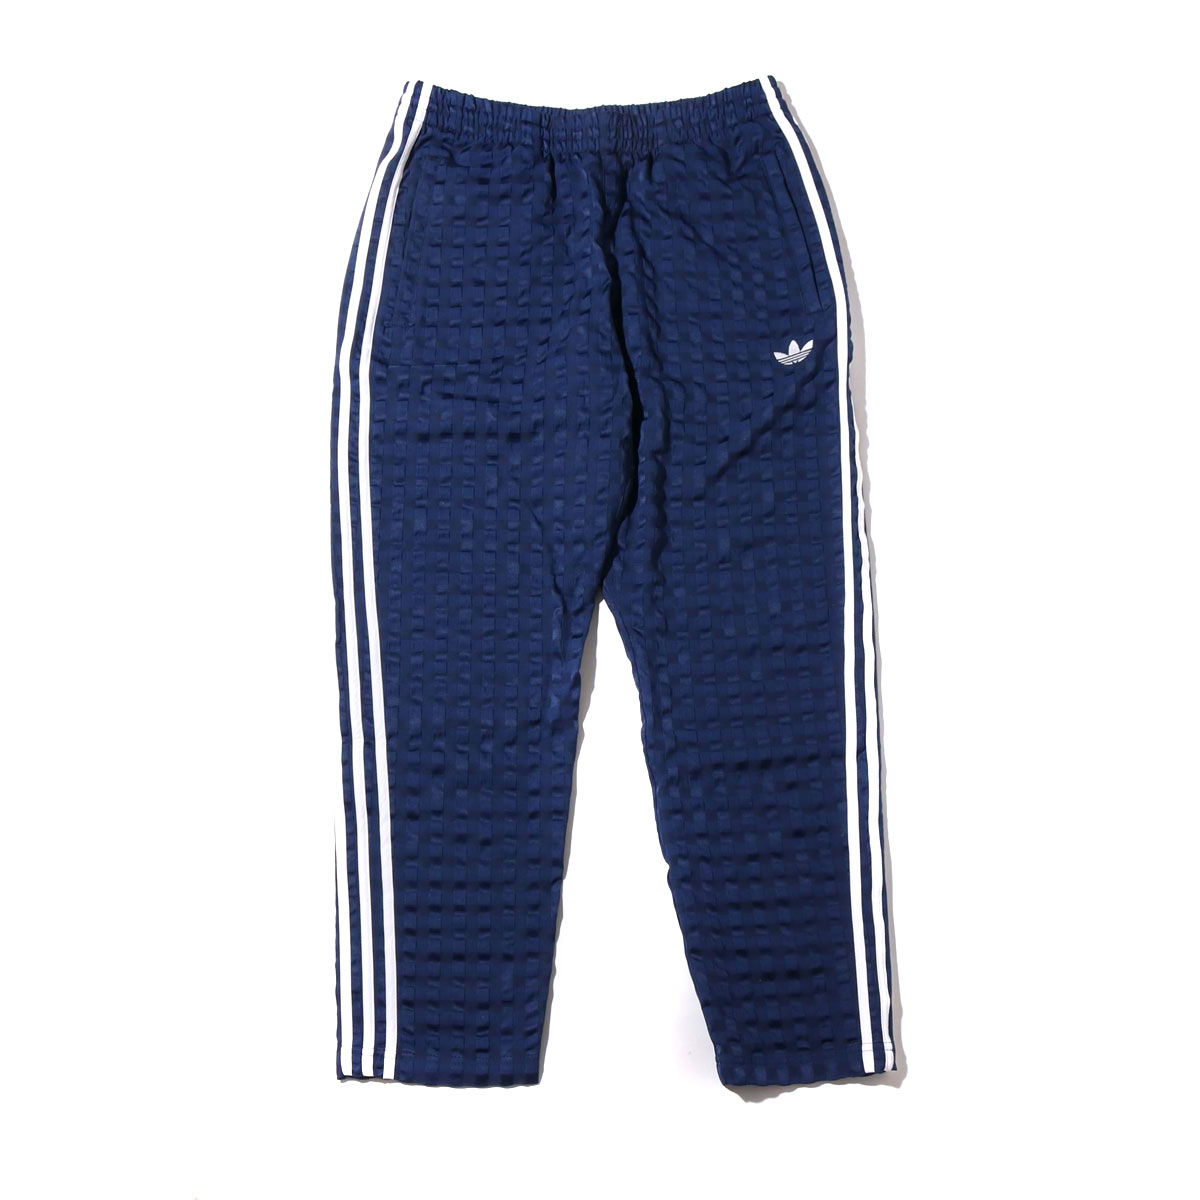 adidas Originals CHCKR PANTS(AfB XIWiX CHCKR pc)COLLEGE NAVY Y pc 19SS-I